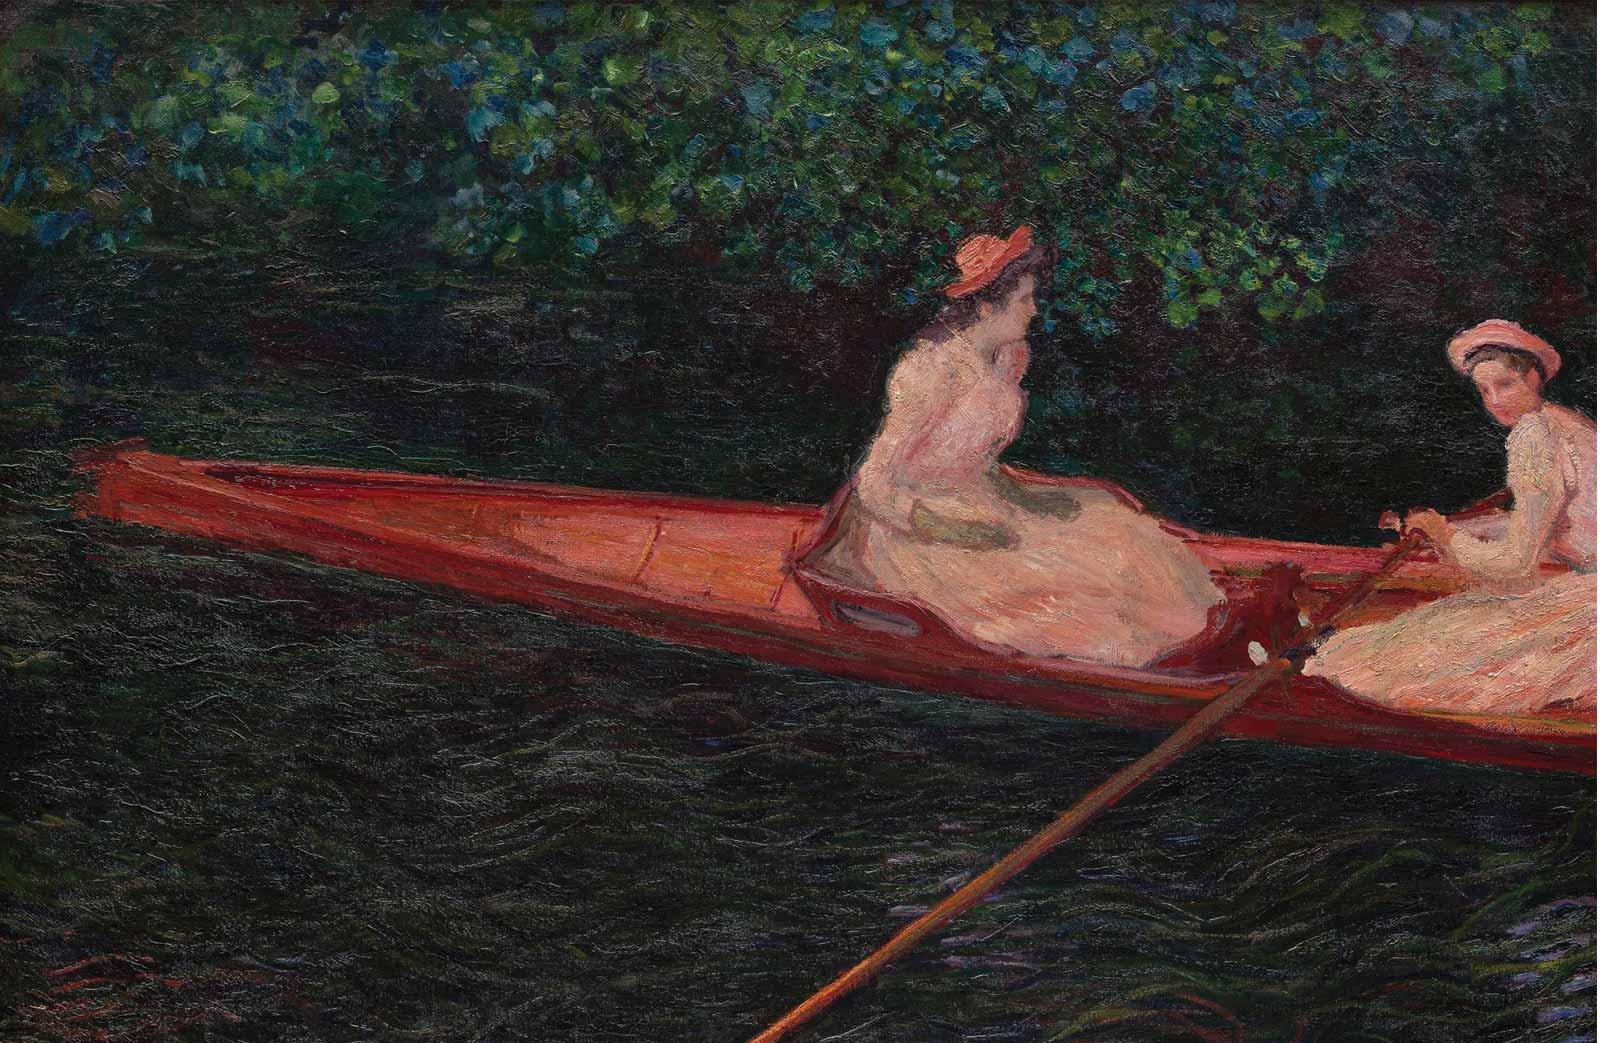 Claude Monet, The Canoe on the Epte, about 1890.